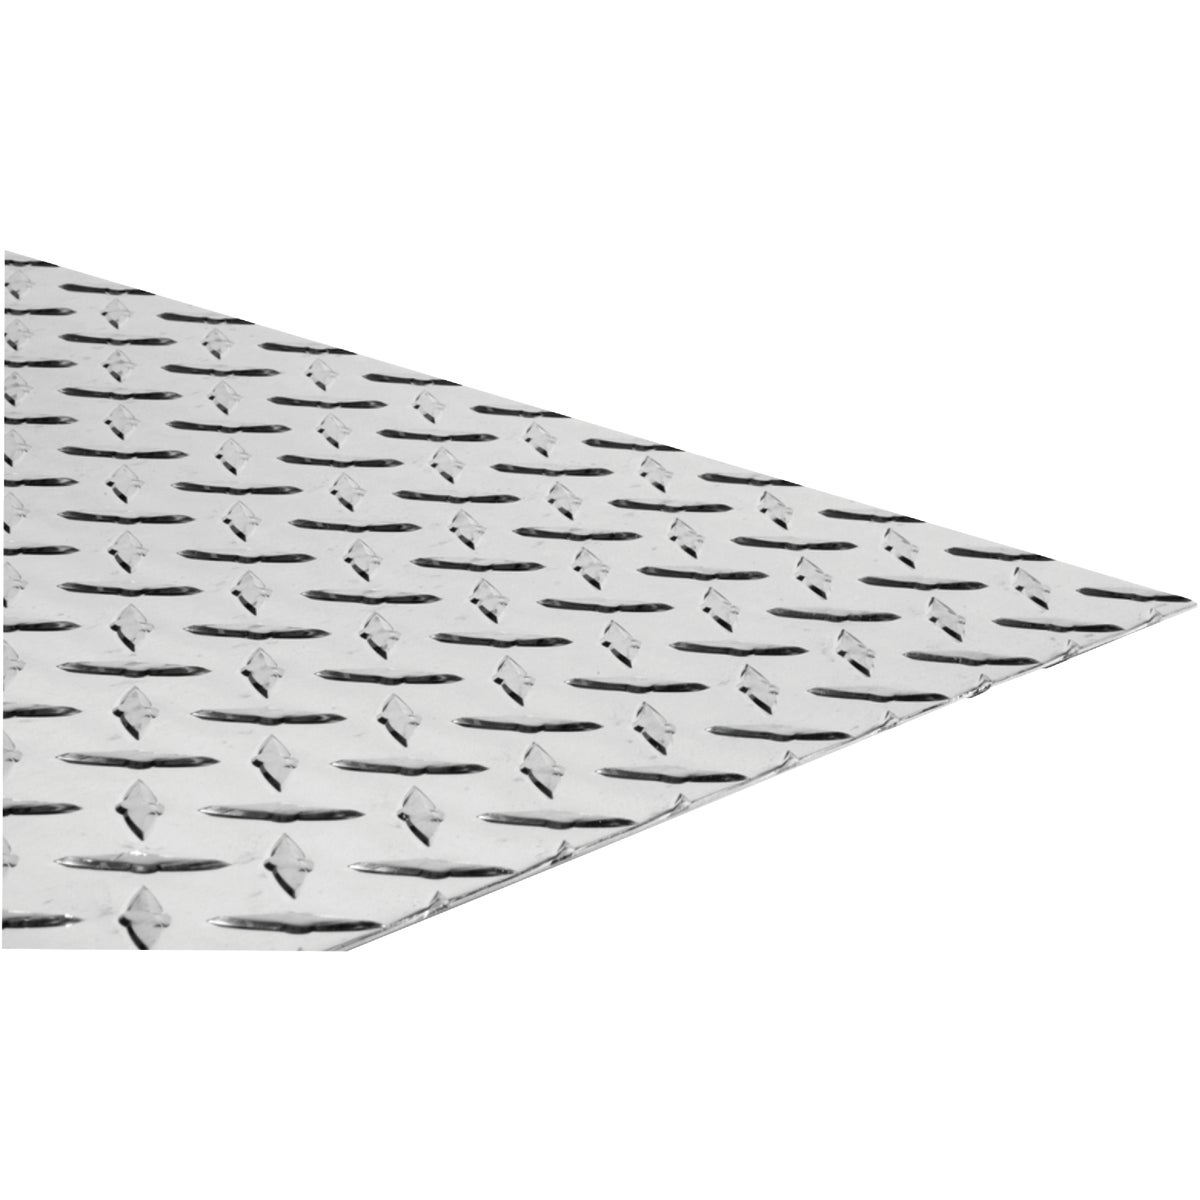 Item 735507, Brite aluminum tread plates are ideal for vehicle interior applications and